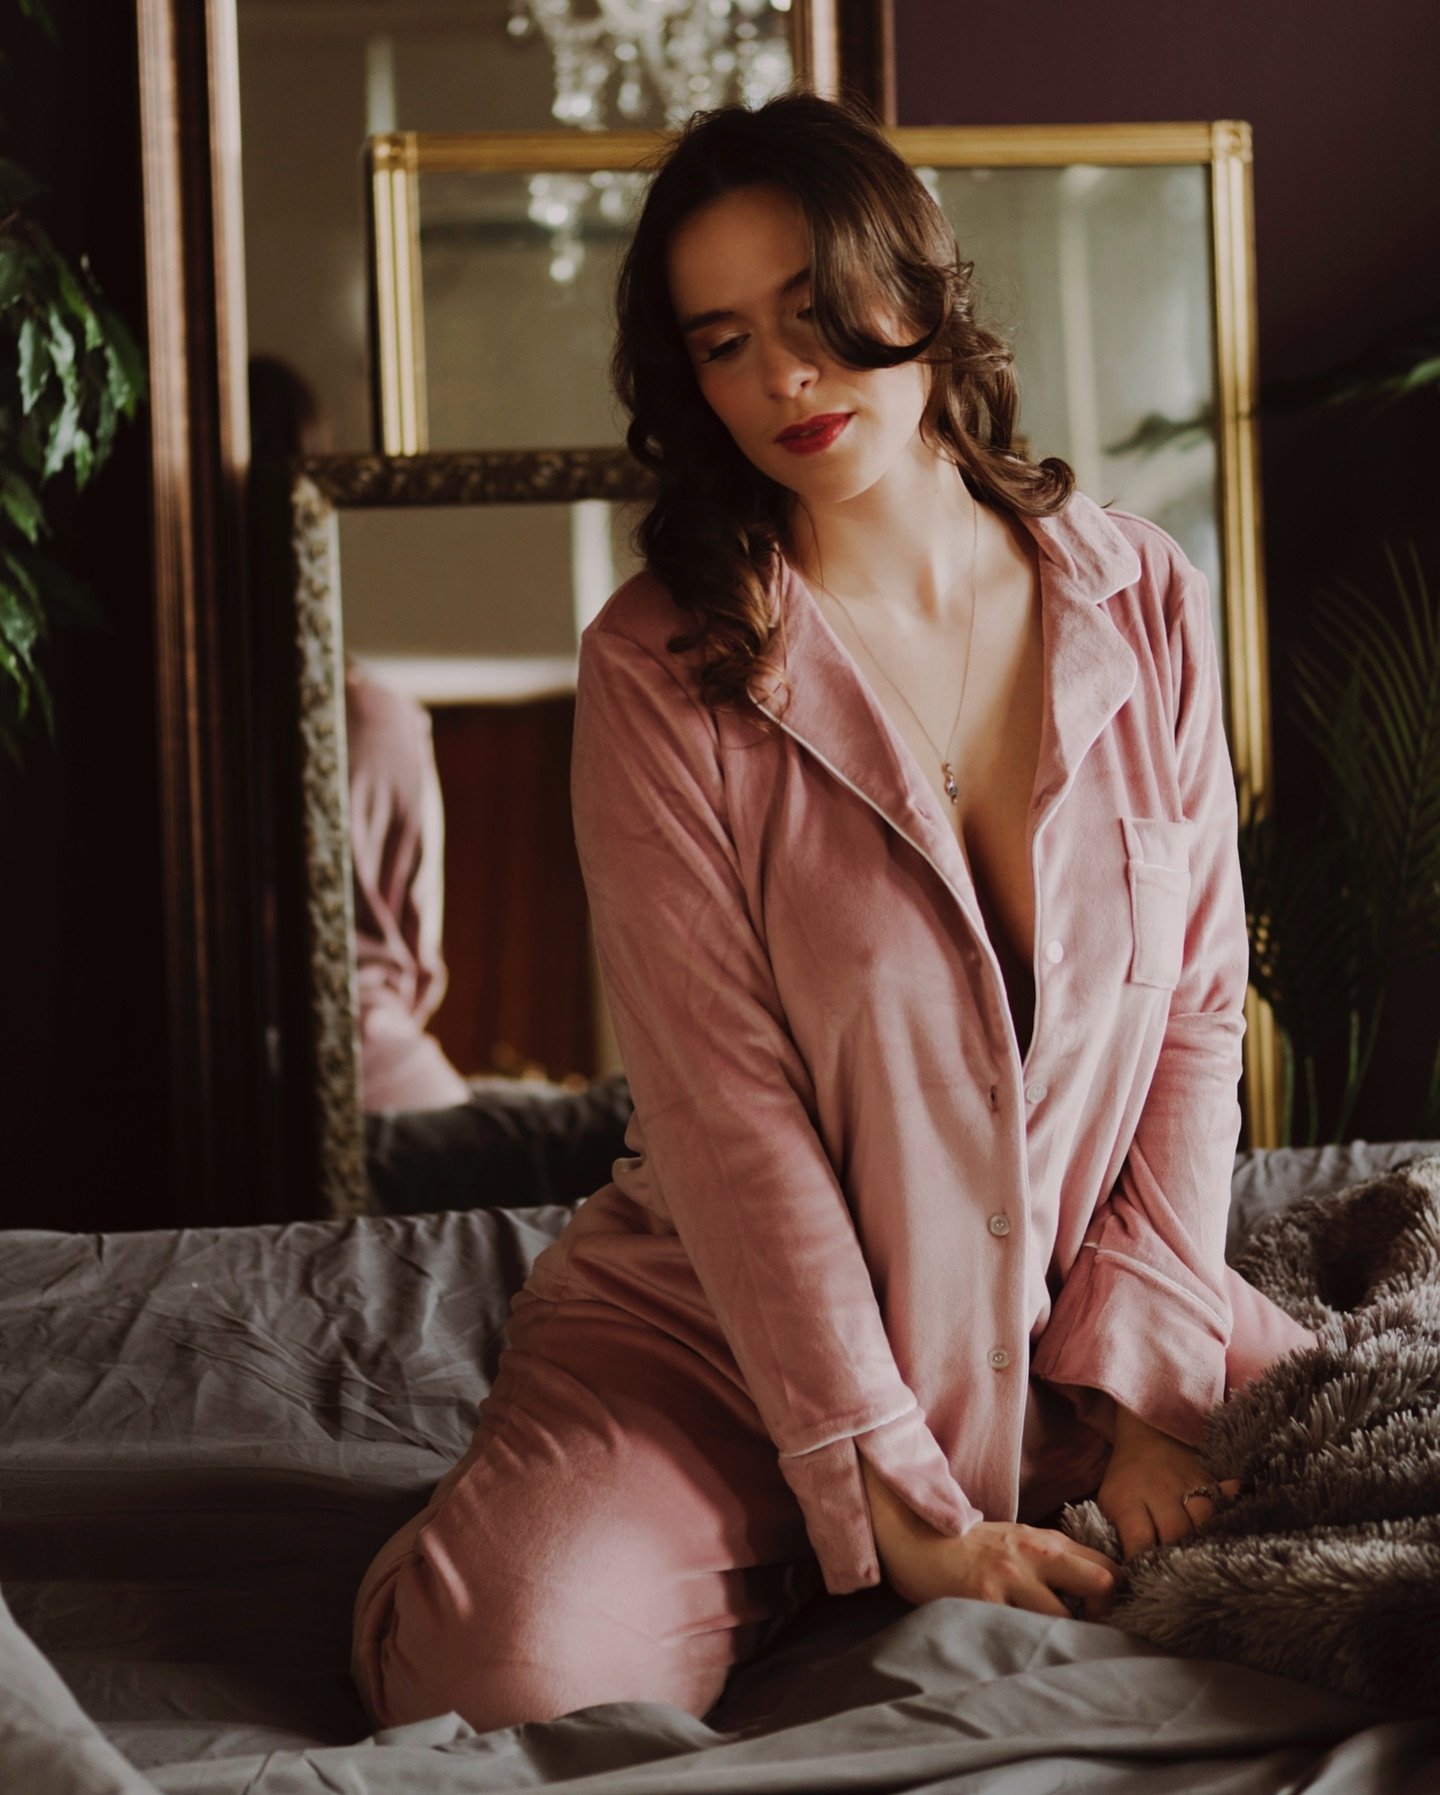 Don&rsquo;t get us wrong&hellip; we love lingerie. But we always tell our girlies they can bring anything that makes them feel beautiful to the session ✨

Including: PJ&rsquo;s, T-shirt&rsquo;s, Flannels, Sweaters, Robes, Accessories, and more ;)

#b